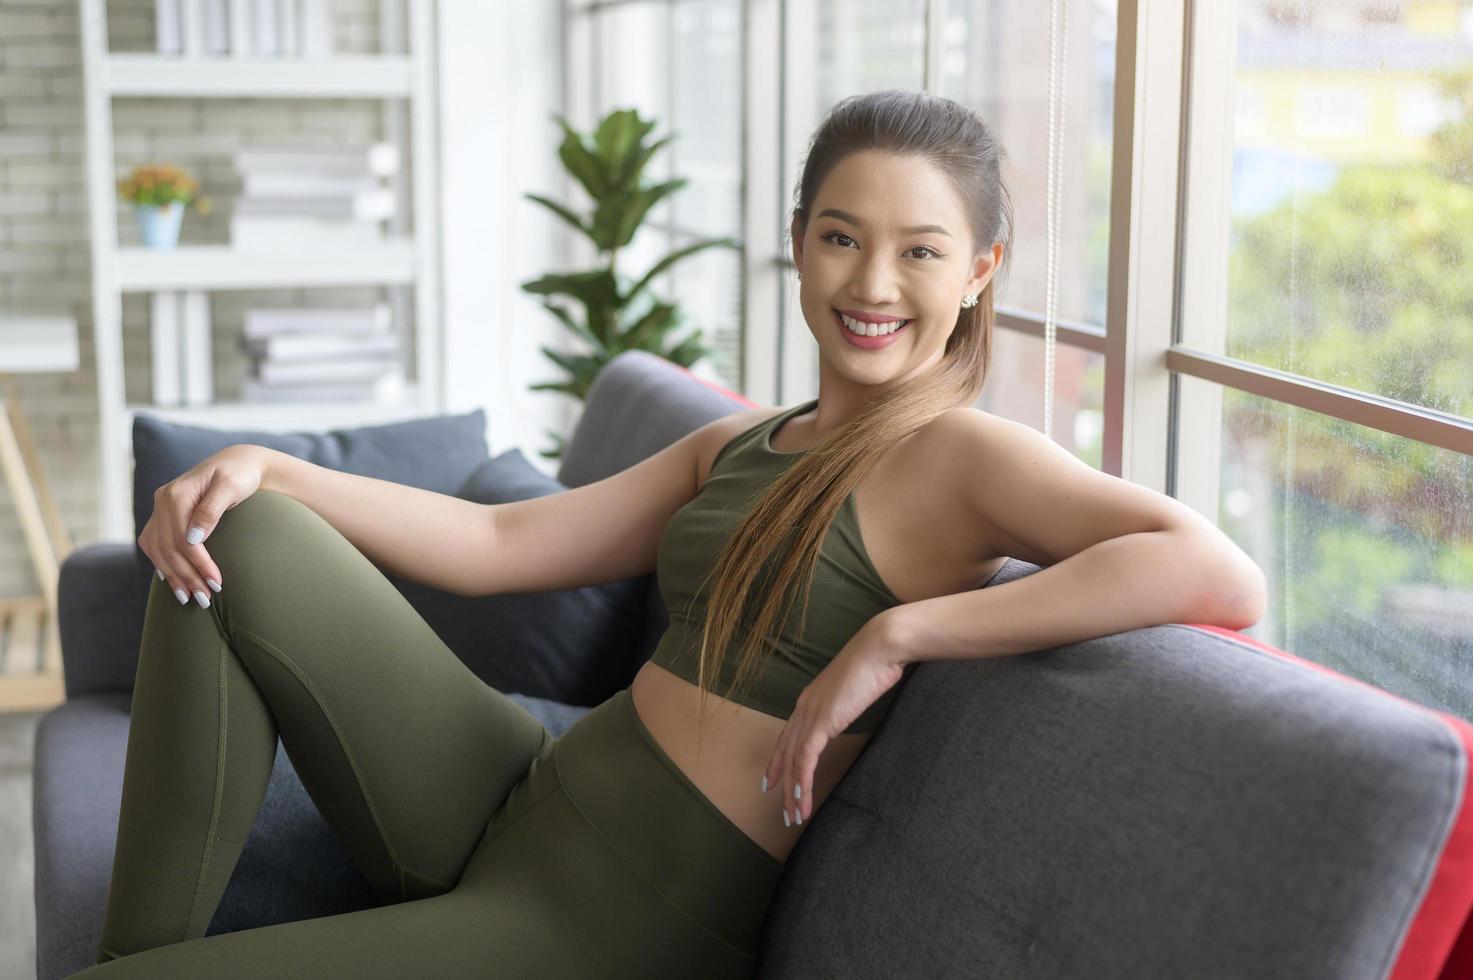 fit beautiful asain woman in sportswear sitting and relaxing on sofa after workout, health and exercise concept photo